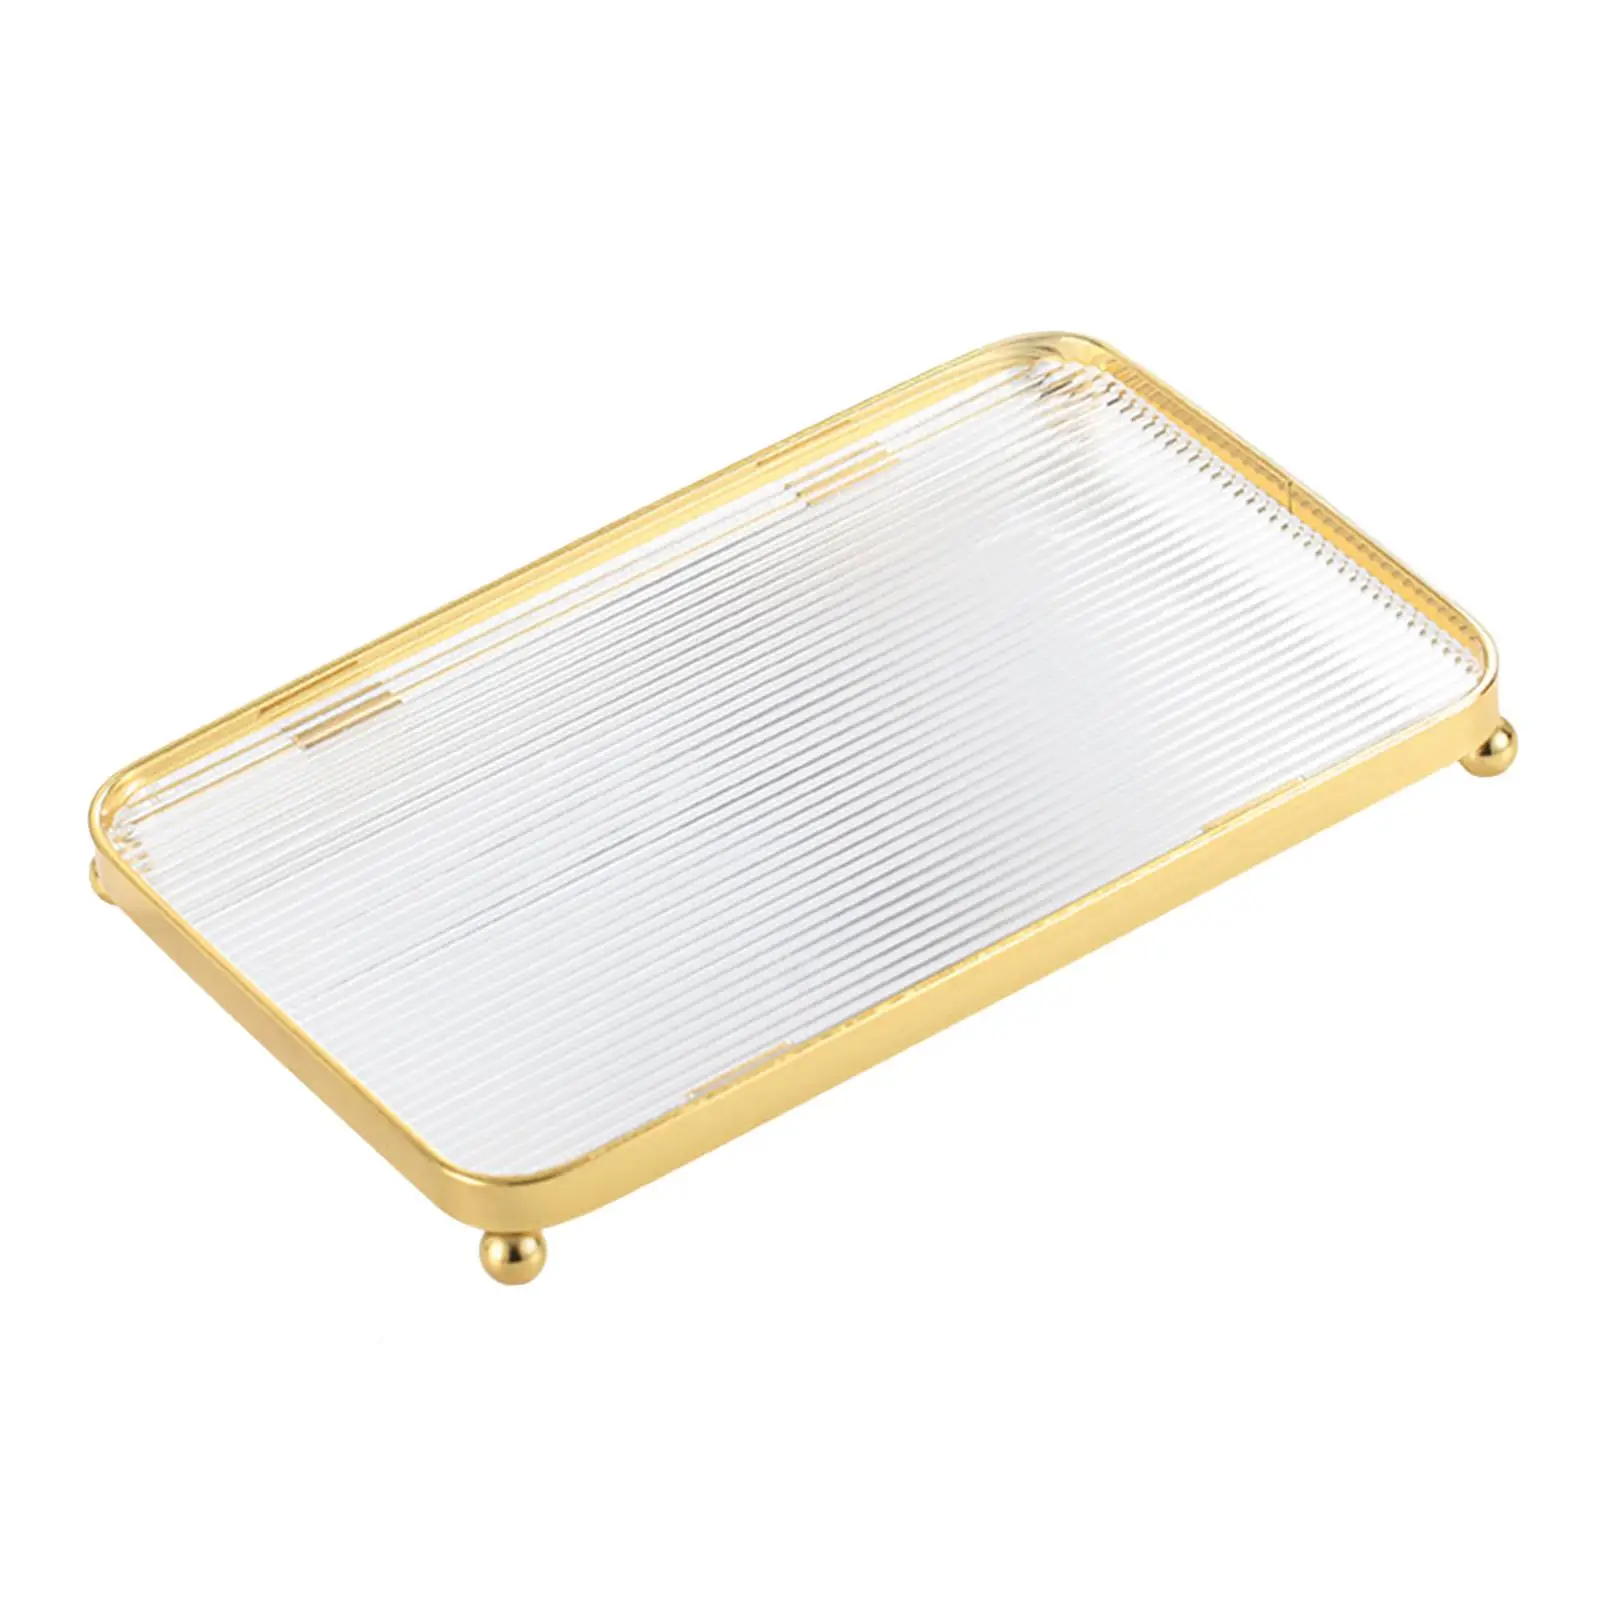 Home Organizer Plate kitchen Serving Tray for Breakfast Drinks Cookie